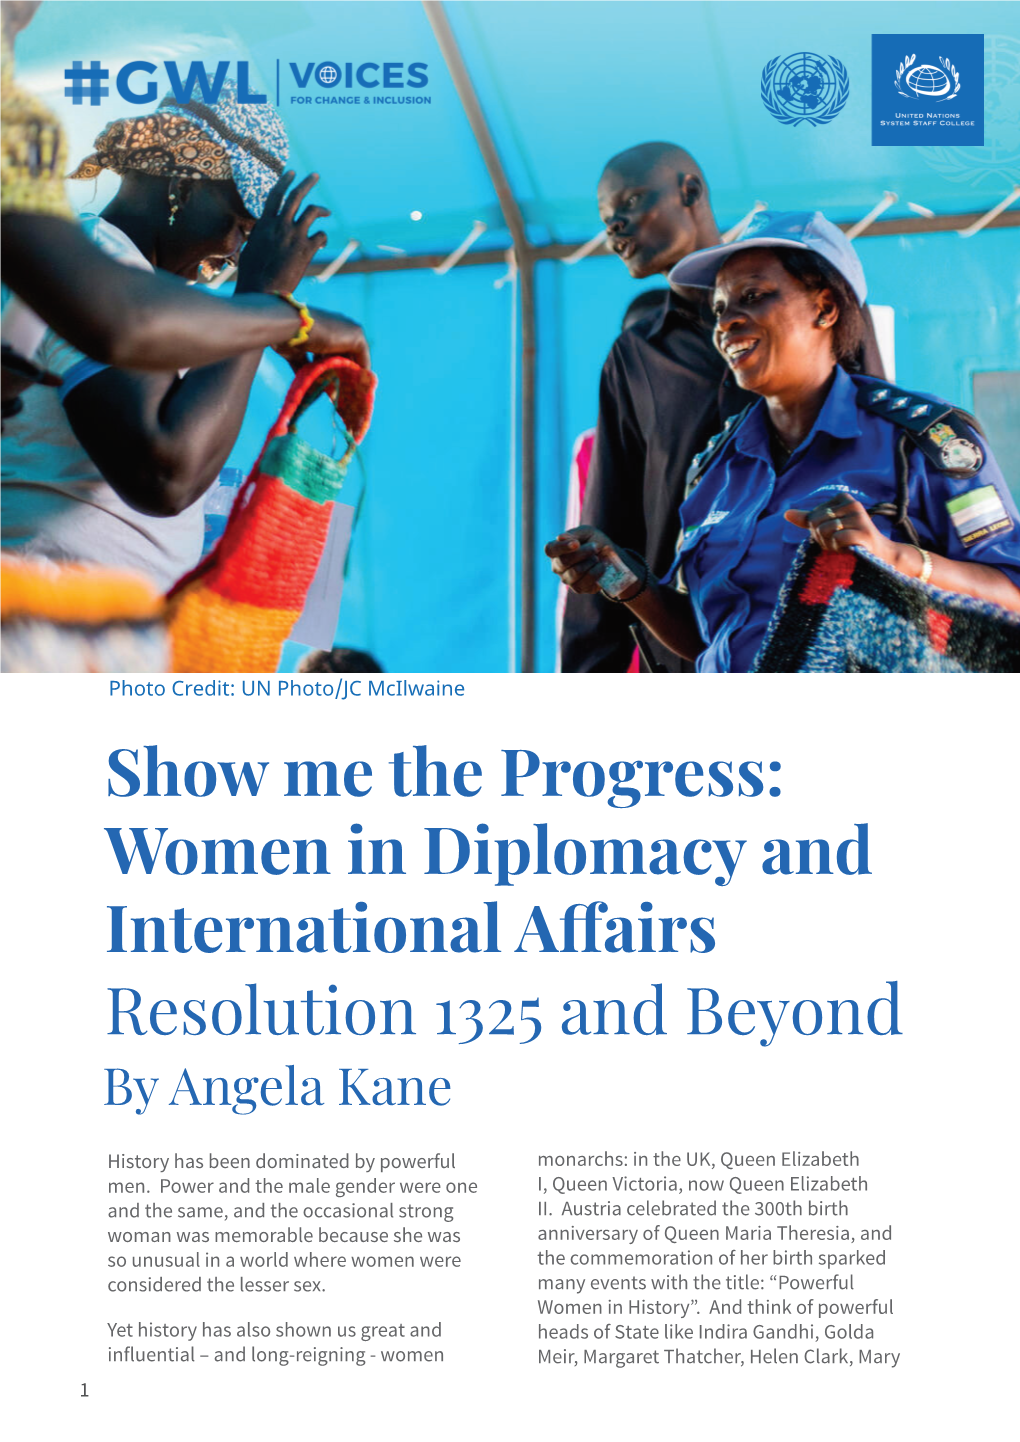 Show Me the Progress: Women in Diplomacy and International Affairs Resolution 1325 and Beyond by Angela Kane